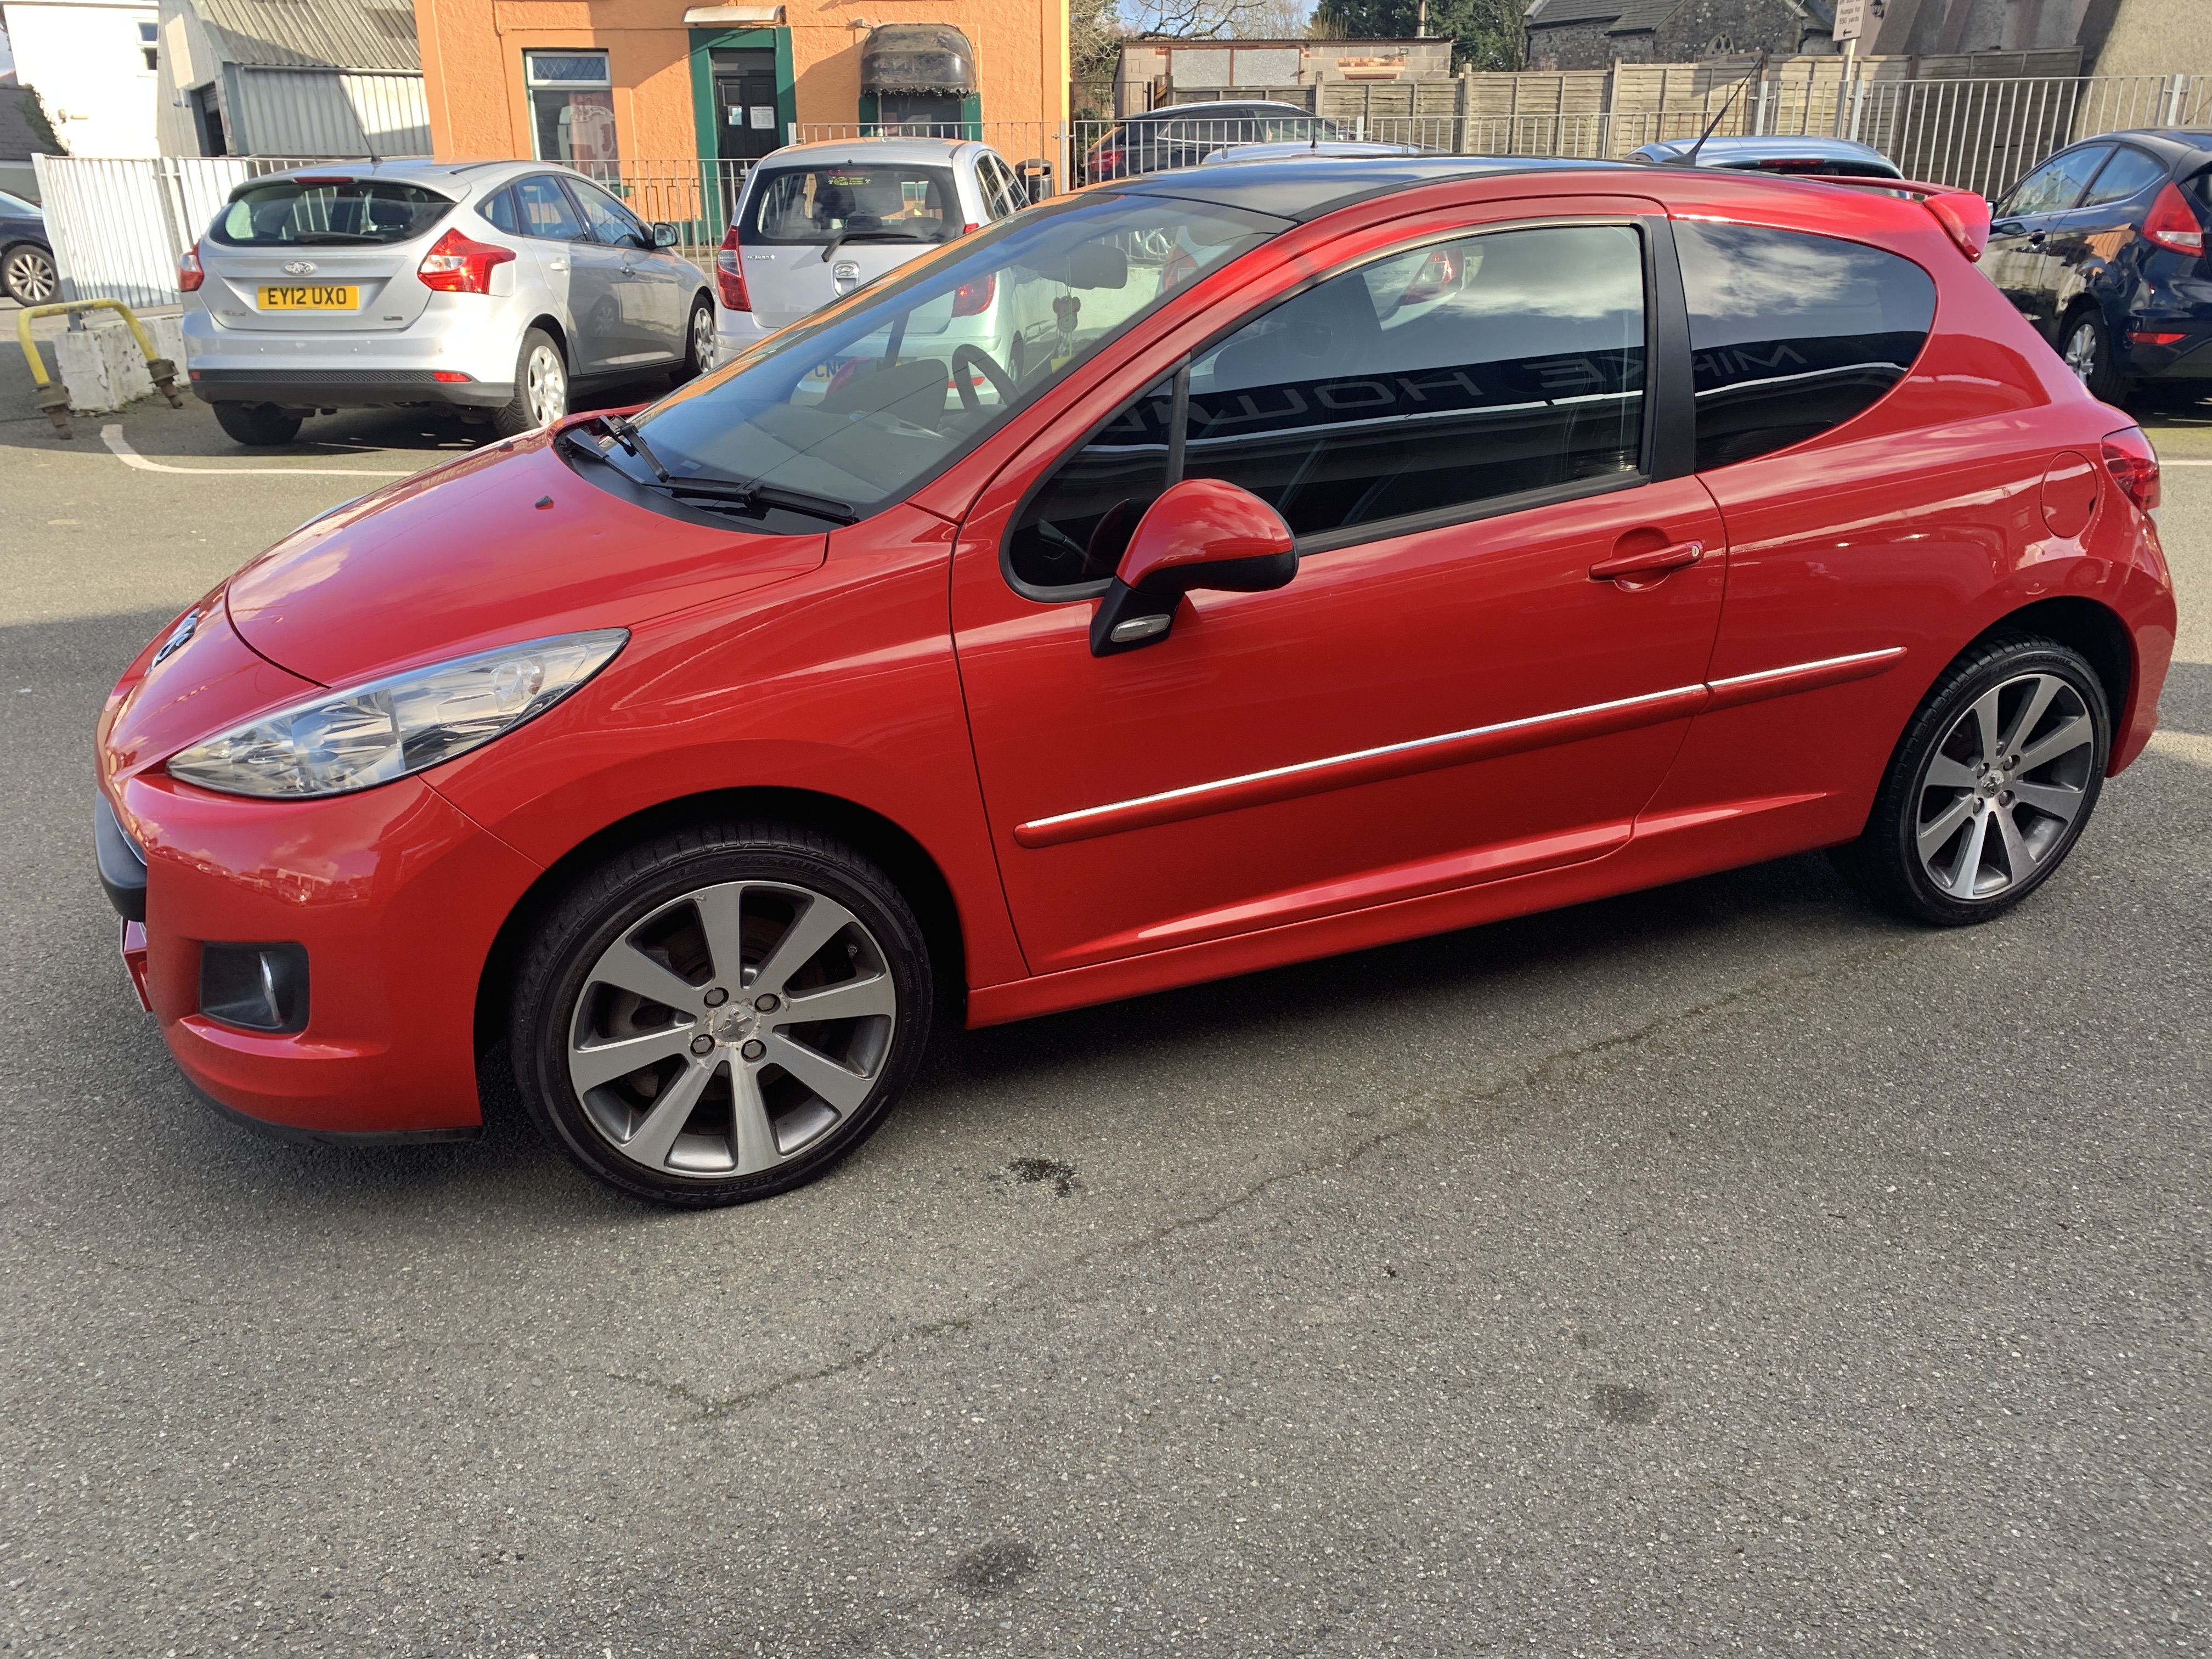 Peugeot 207 GTI 175 BHP for sale at Mike Howlin Motor Sales Pembrokeshire